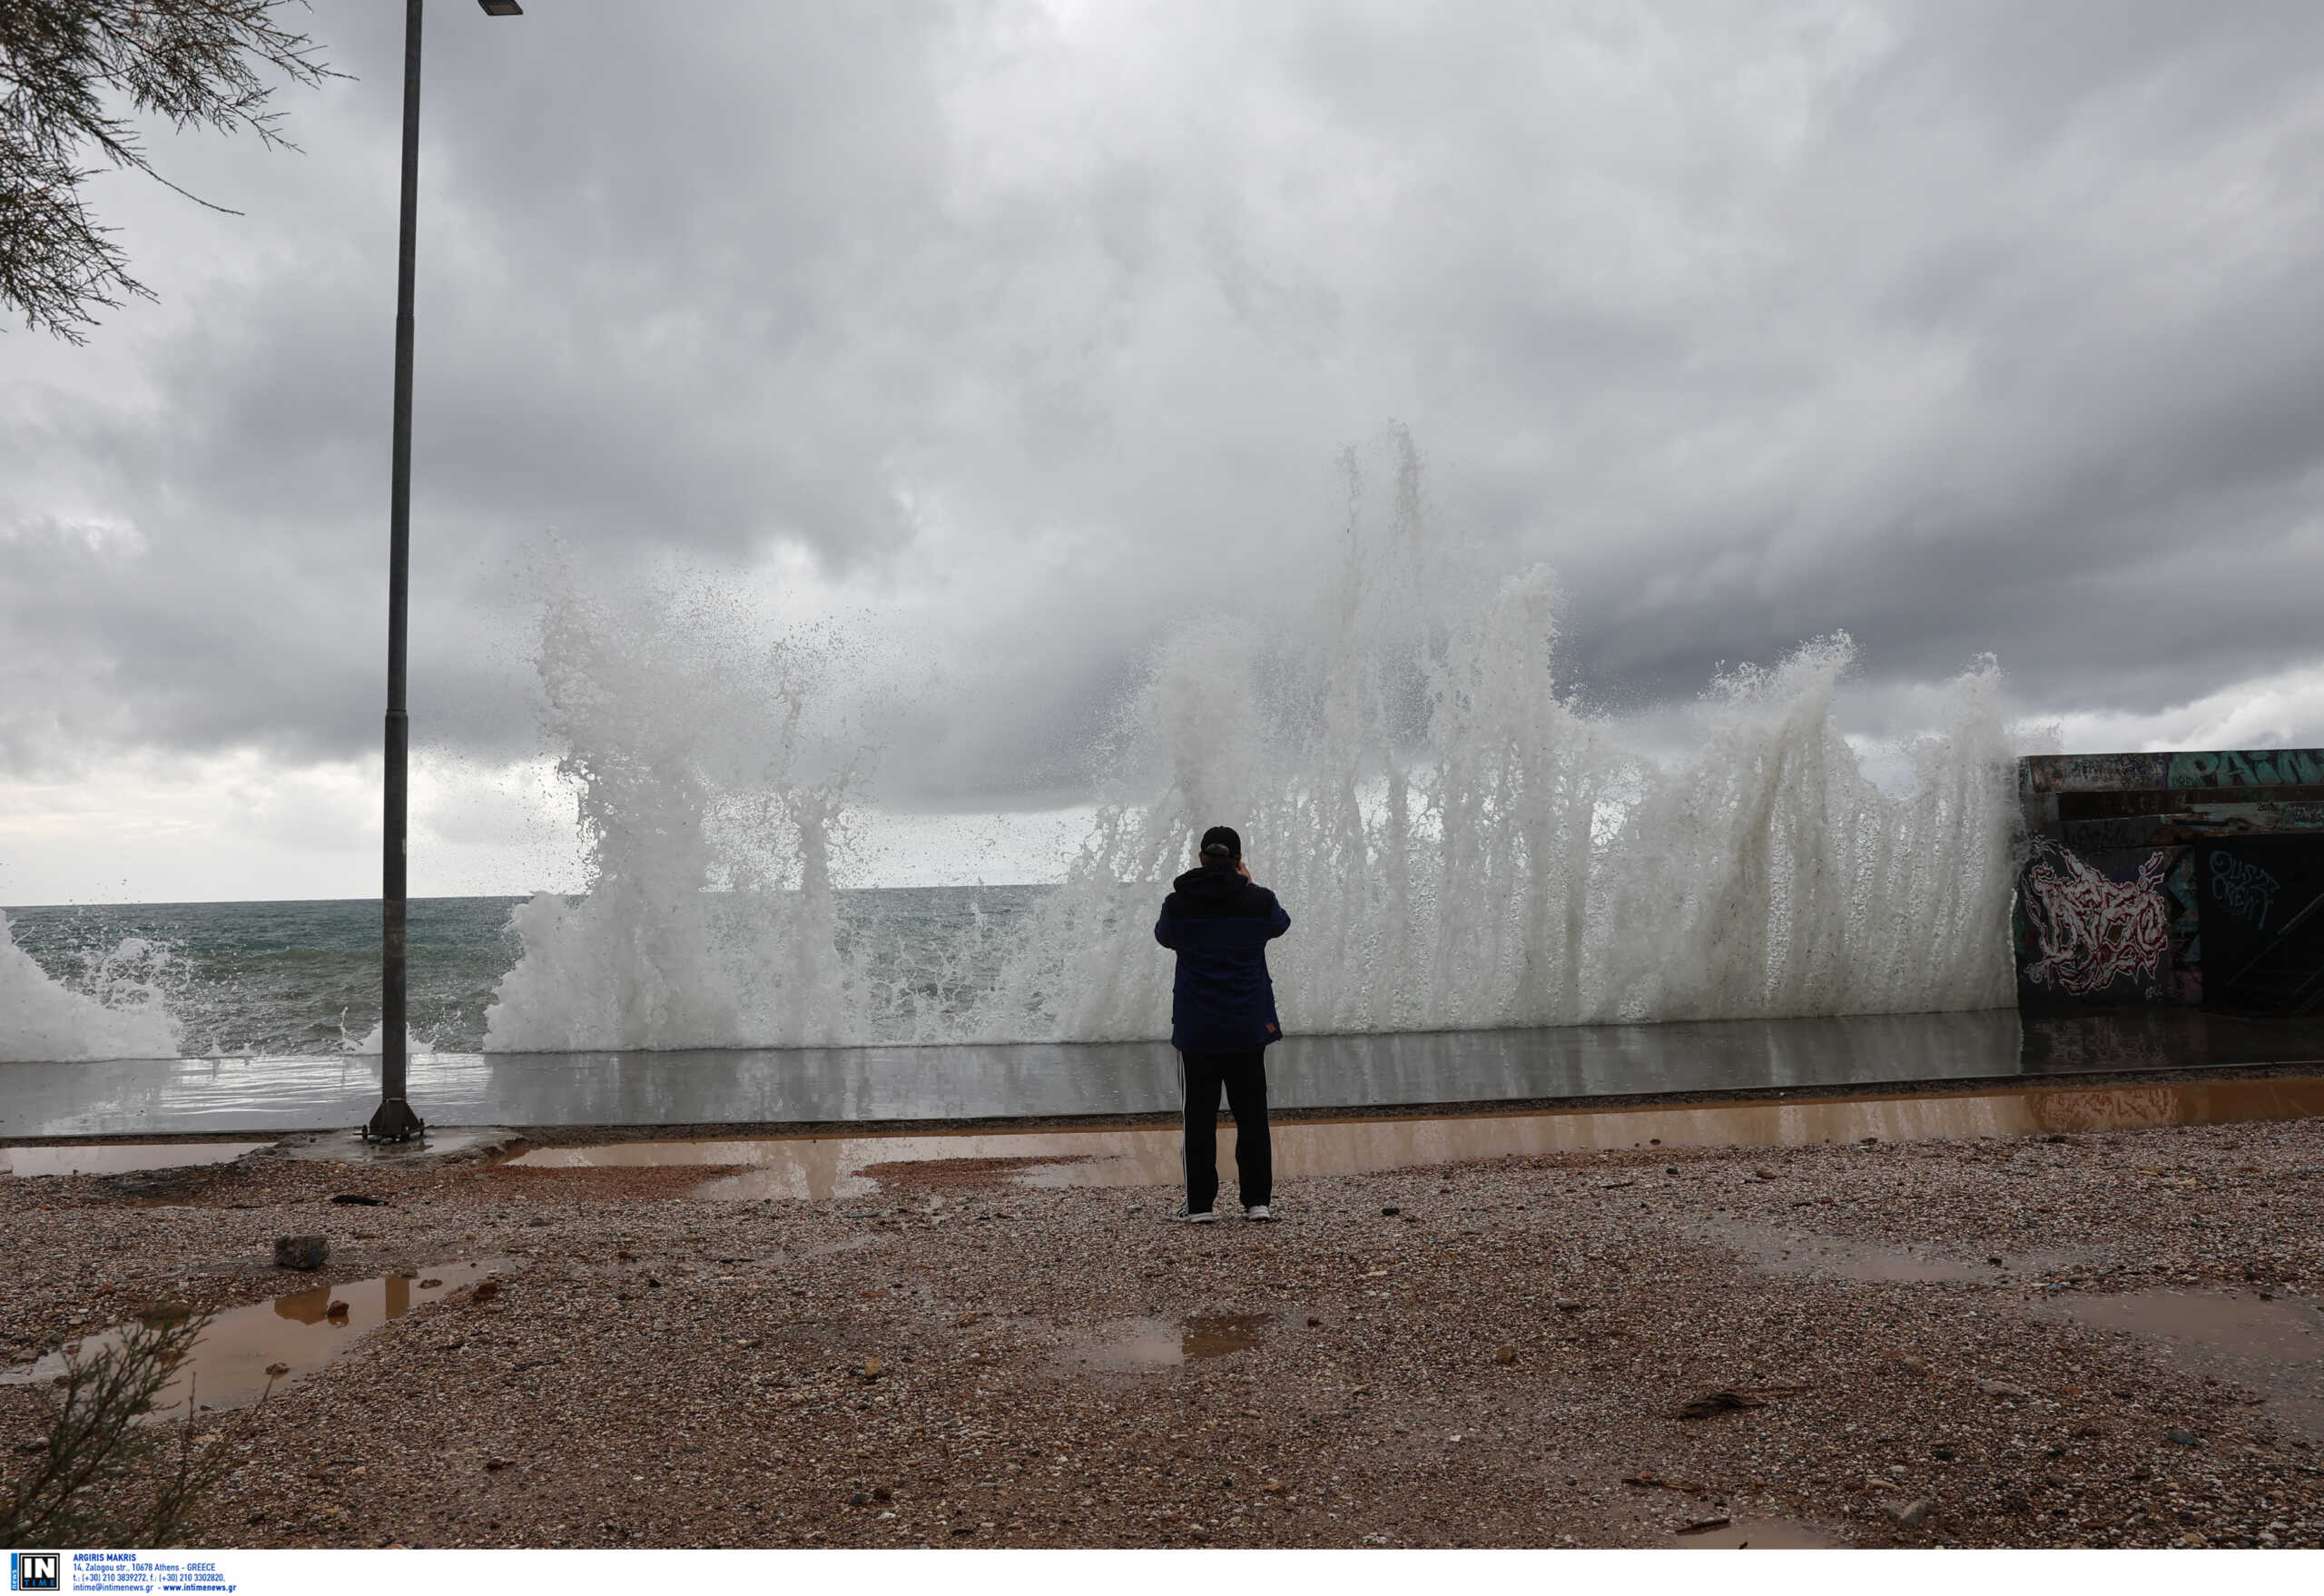 Bad weather ILINA – Yiannis Kallianos at newsit.gr: Strong storms in many areas, Monday and Tuesday warning